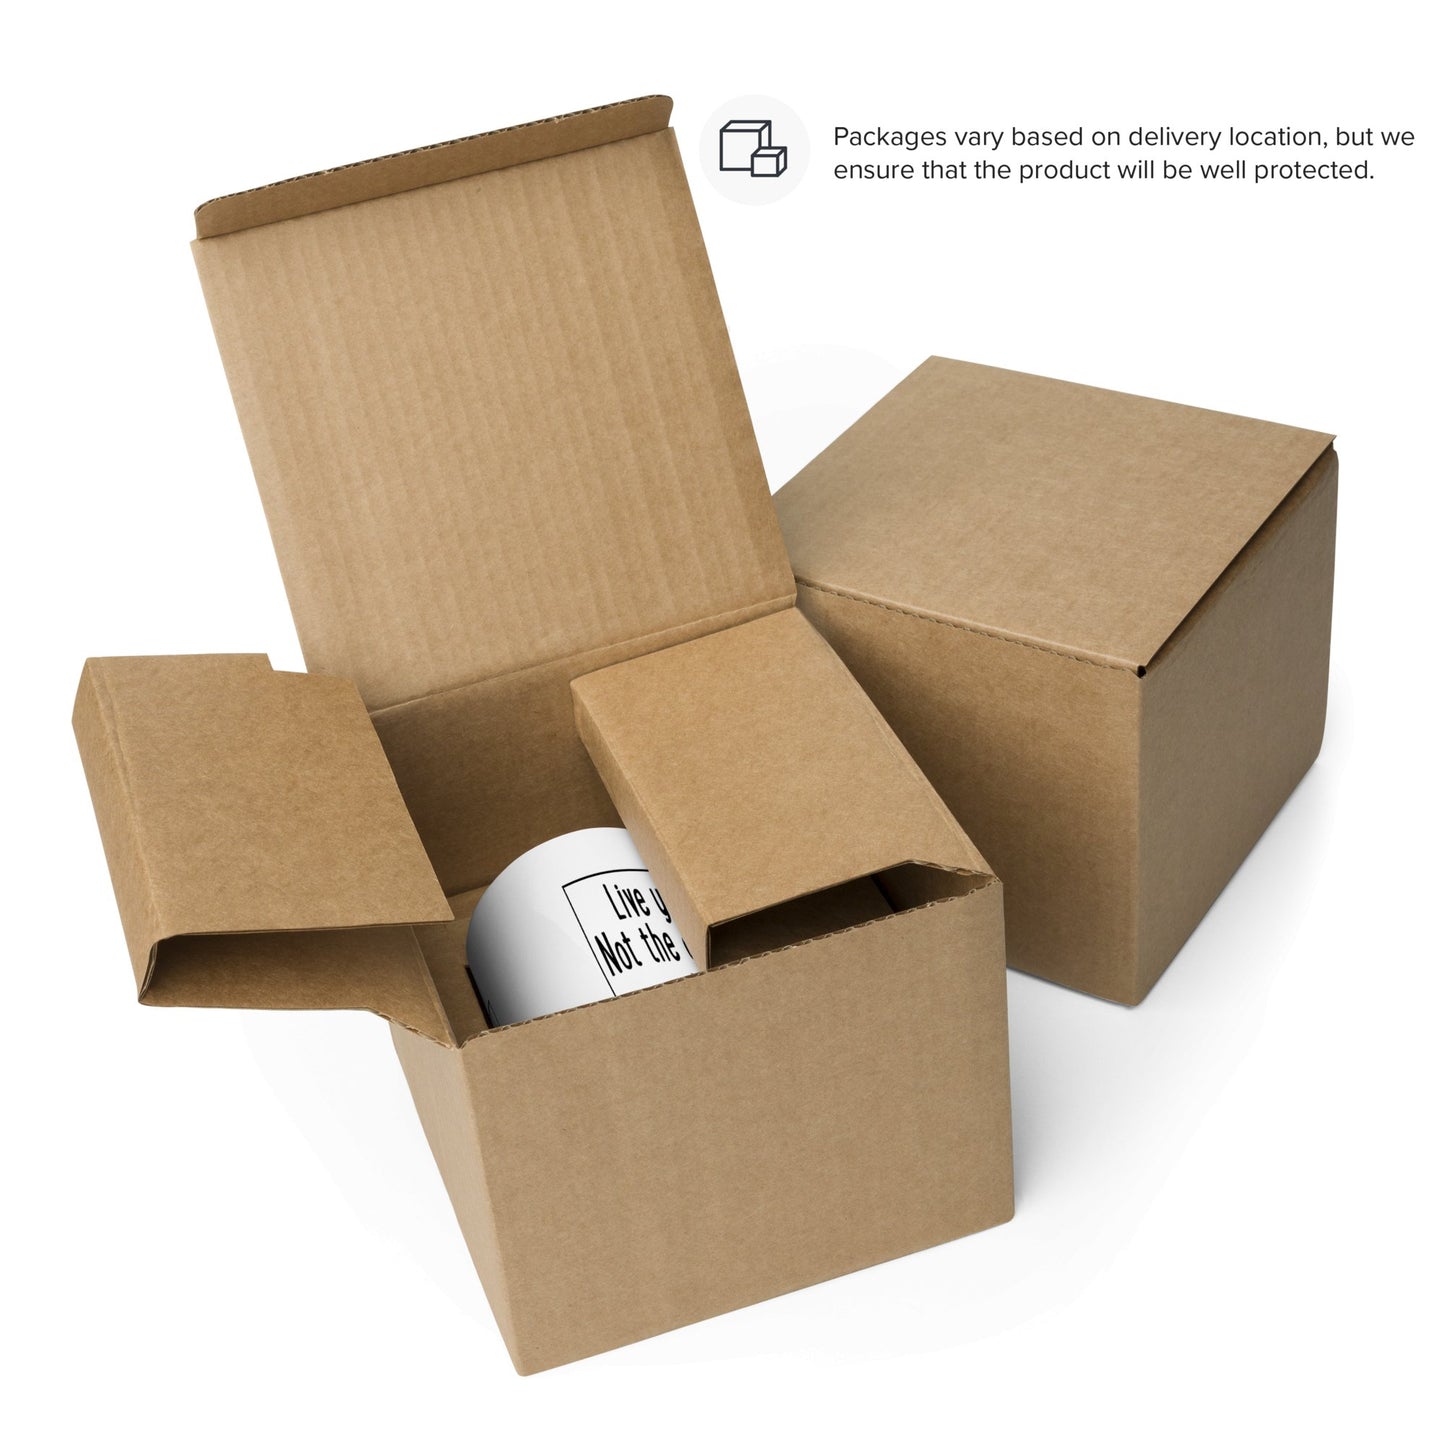 Three open cardboard boxes, one revealing a White glossy Mug Live Your Life. Not The Other Dog's by THiNK LiKE A DOG® printed on it. Text notes that package protection varies by delivery location.